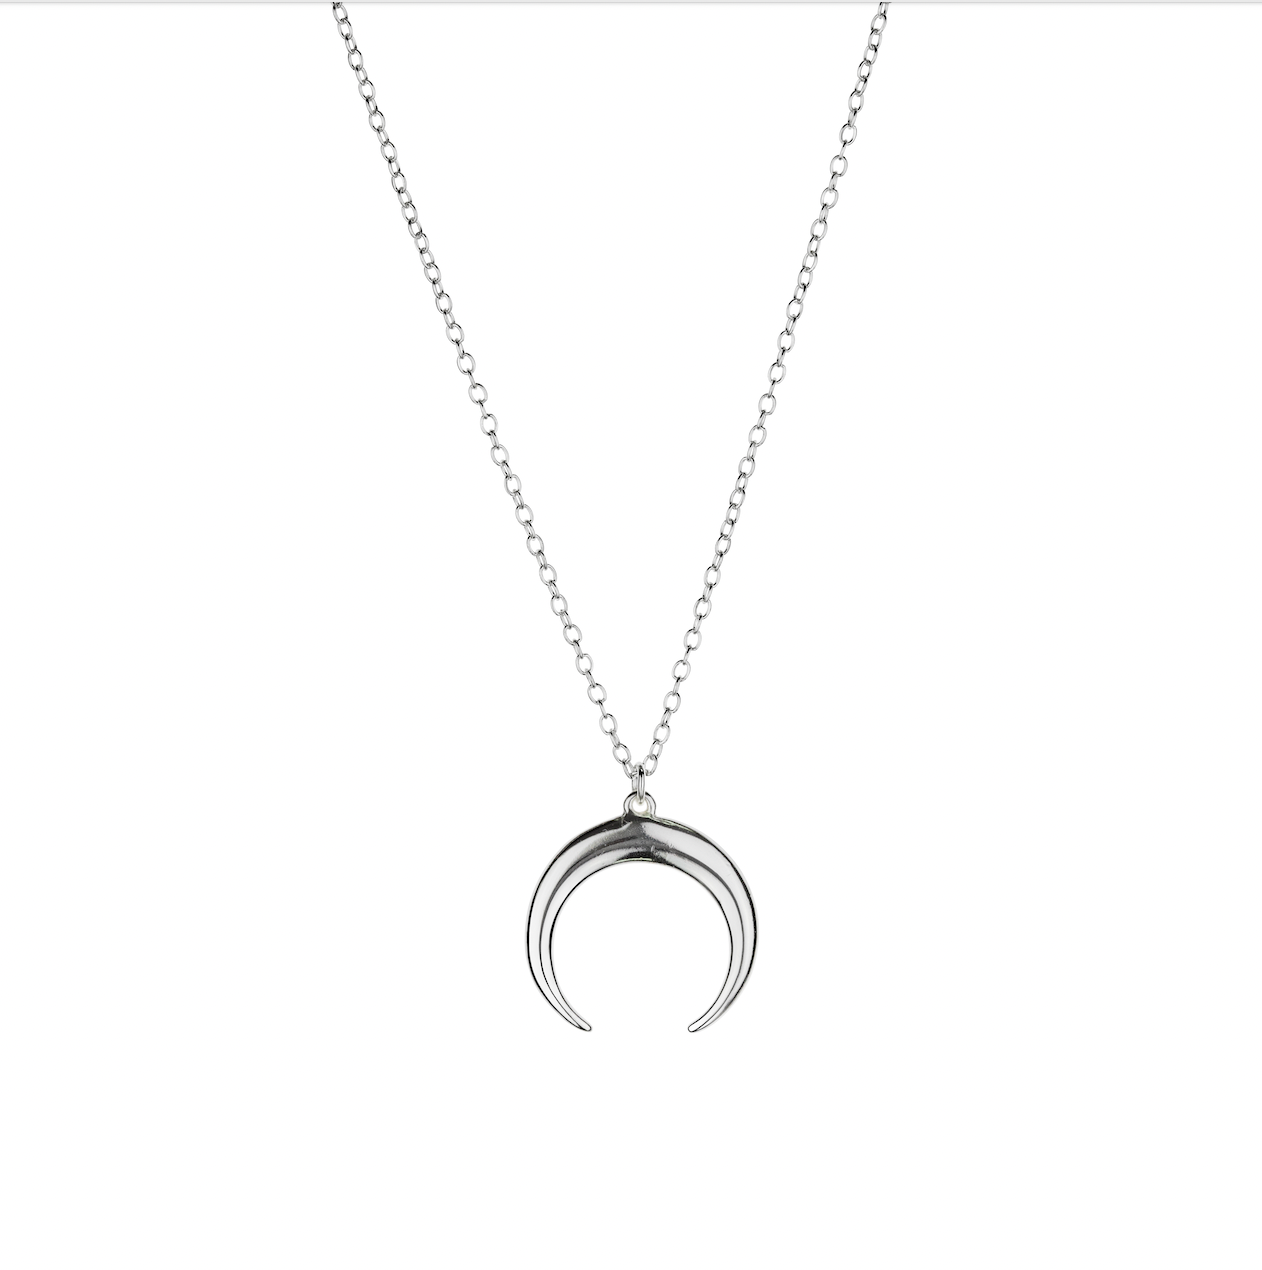 VENICE Sterling Silver long necklace with moon crescent charm